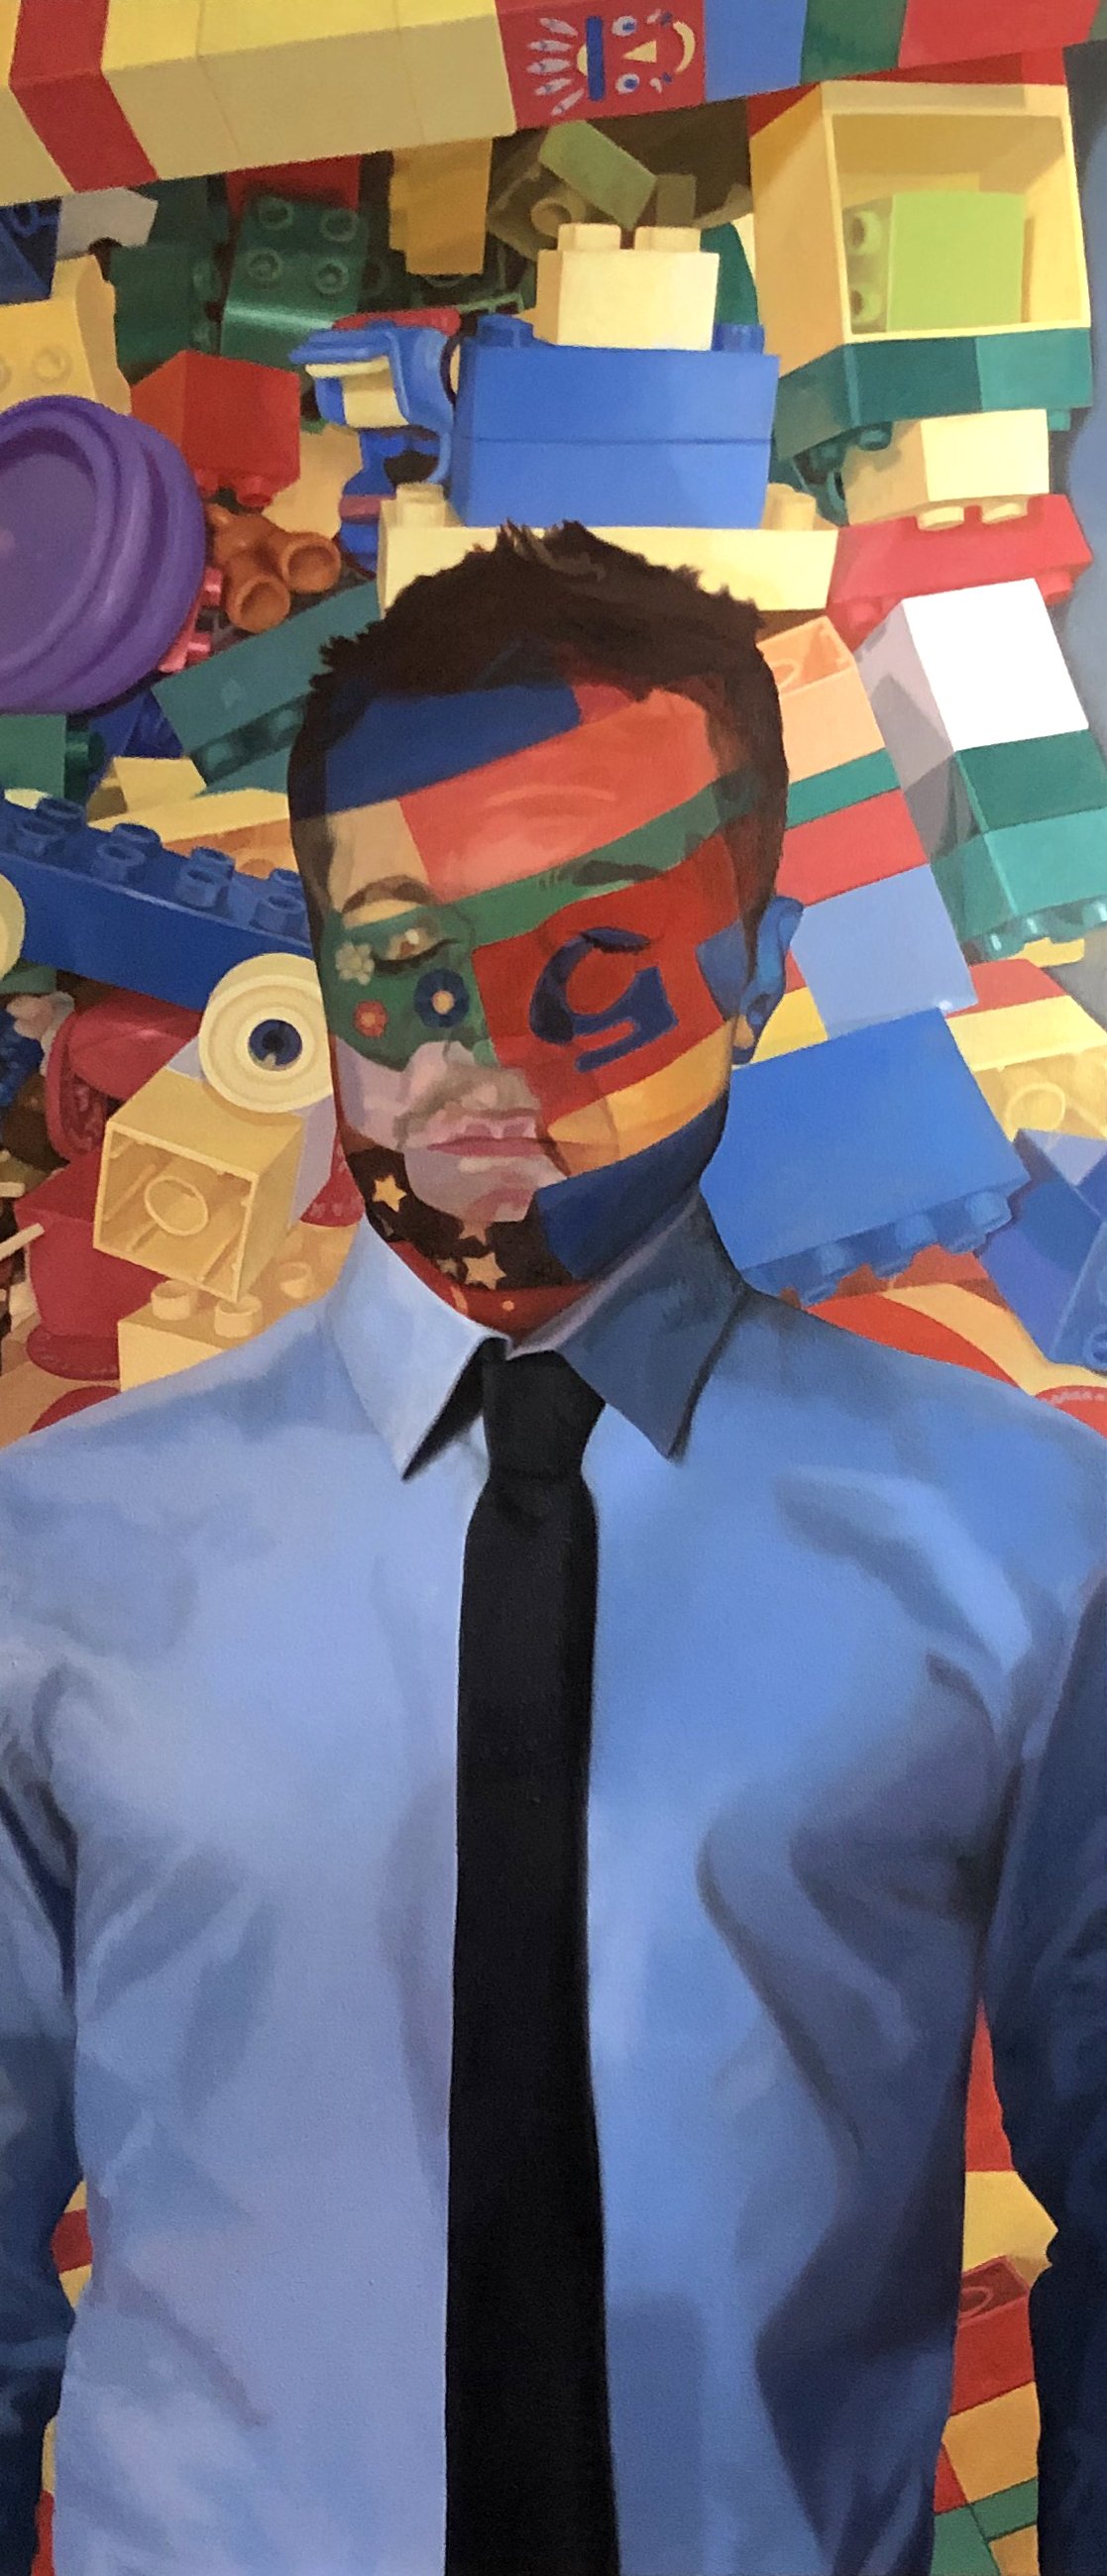  Wall, Oil on Canvas, 58” x 24”, 2019 